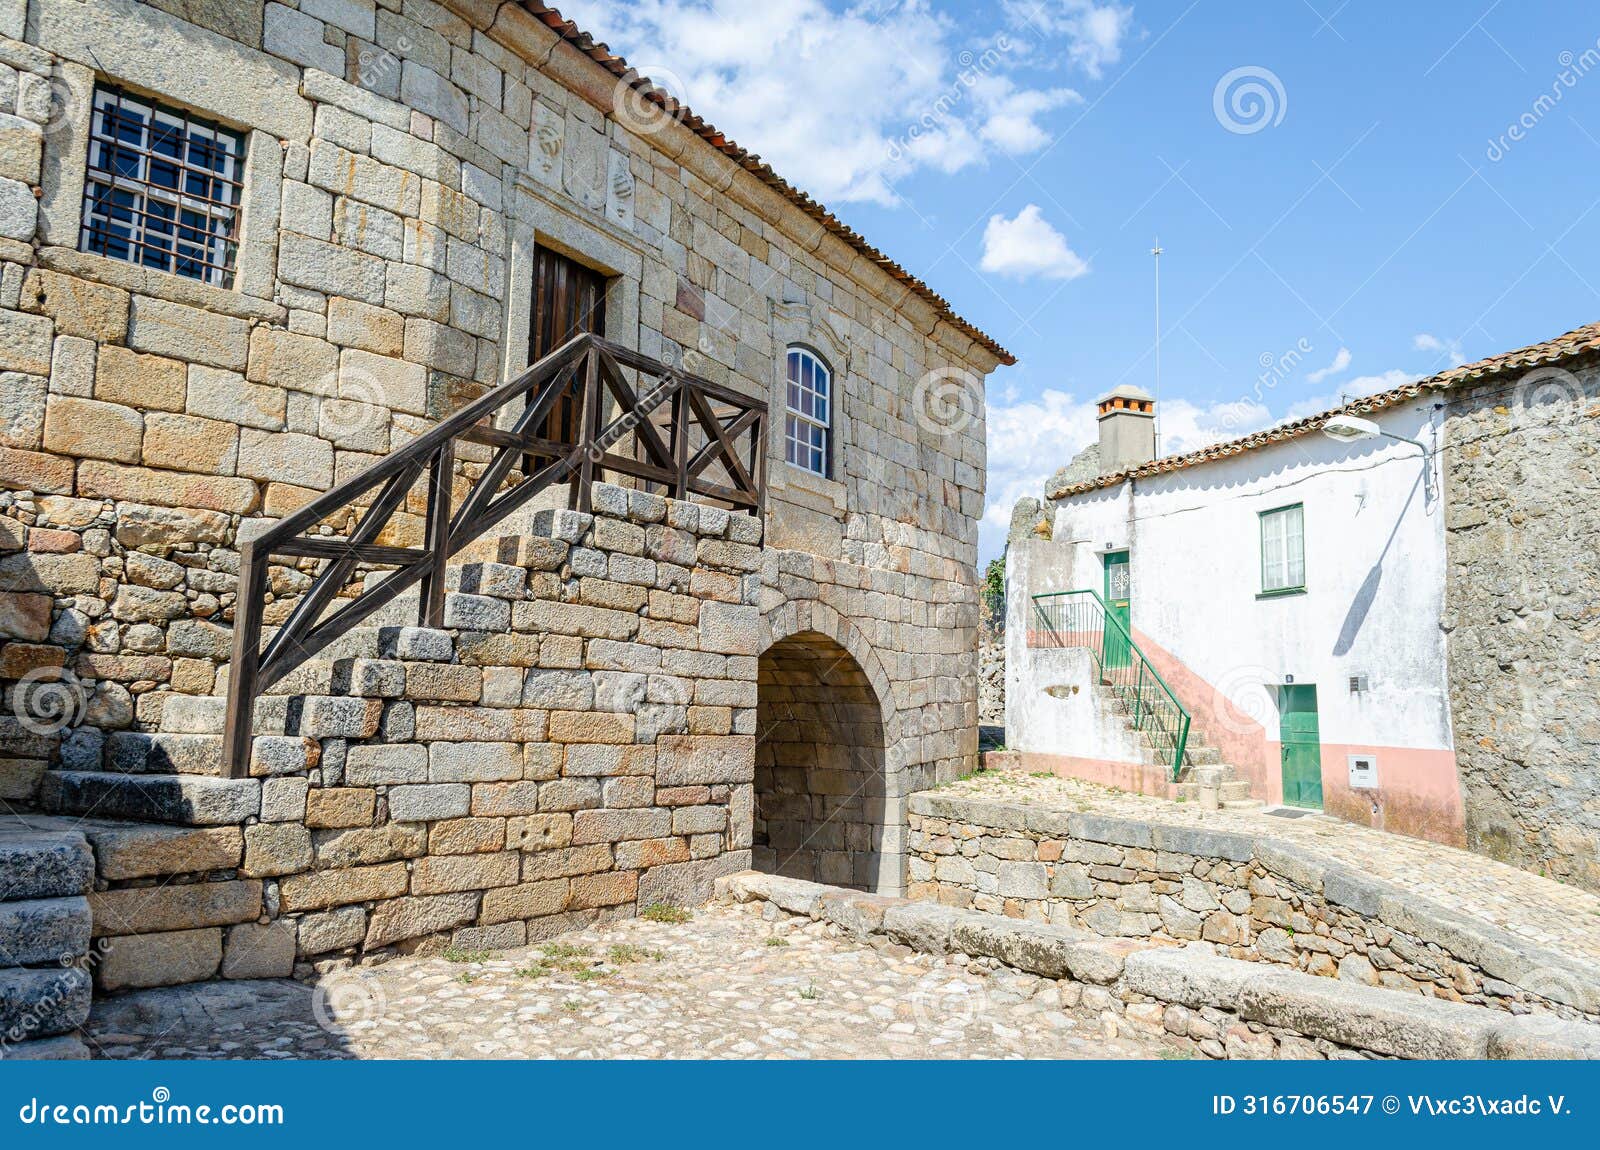 old council house in penamacor, medieval village in the beira baixa region of portugal